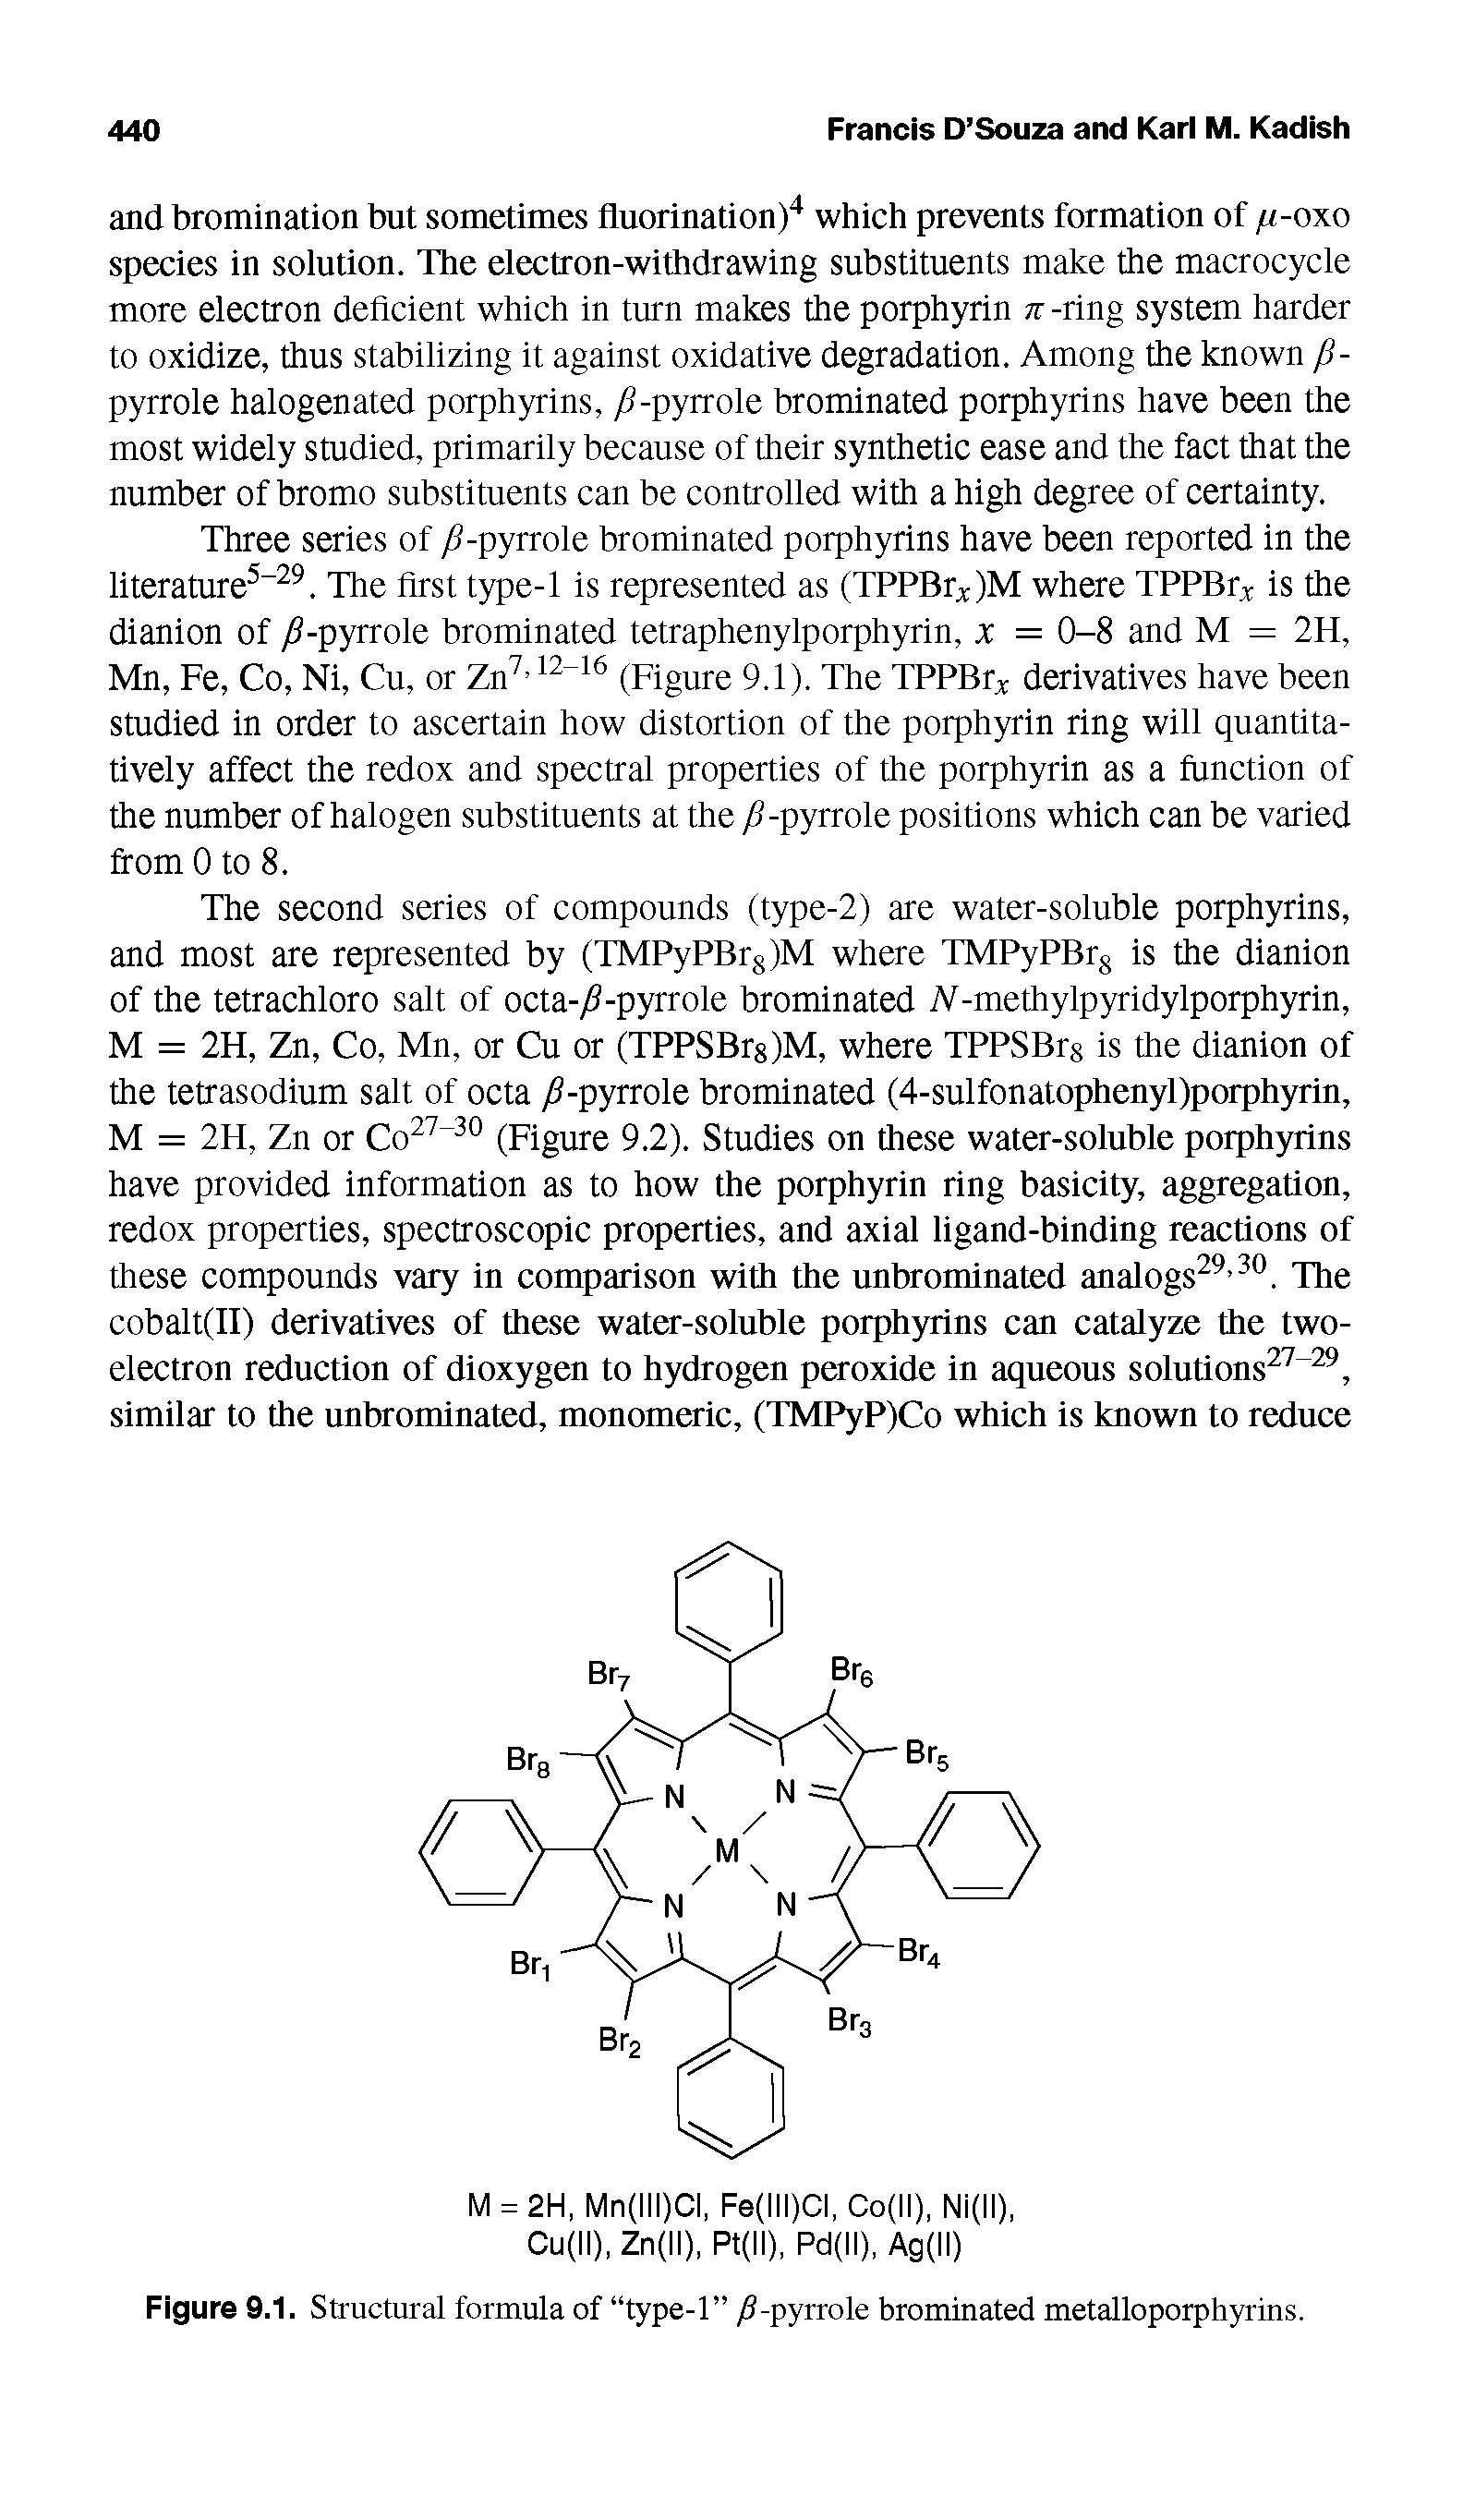 Figure 9.1. Structural formula of type-1 yS-pyrrole brominated metalloporphyrins...